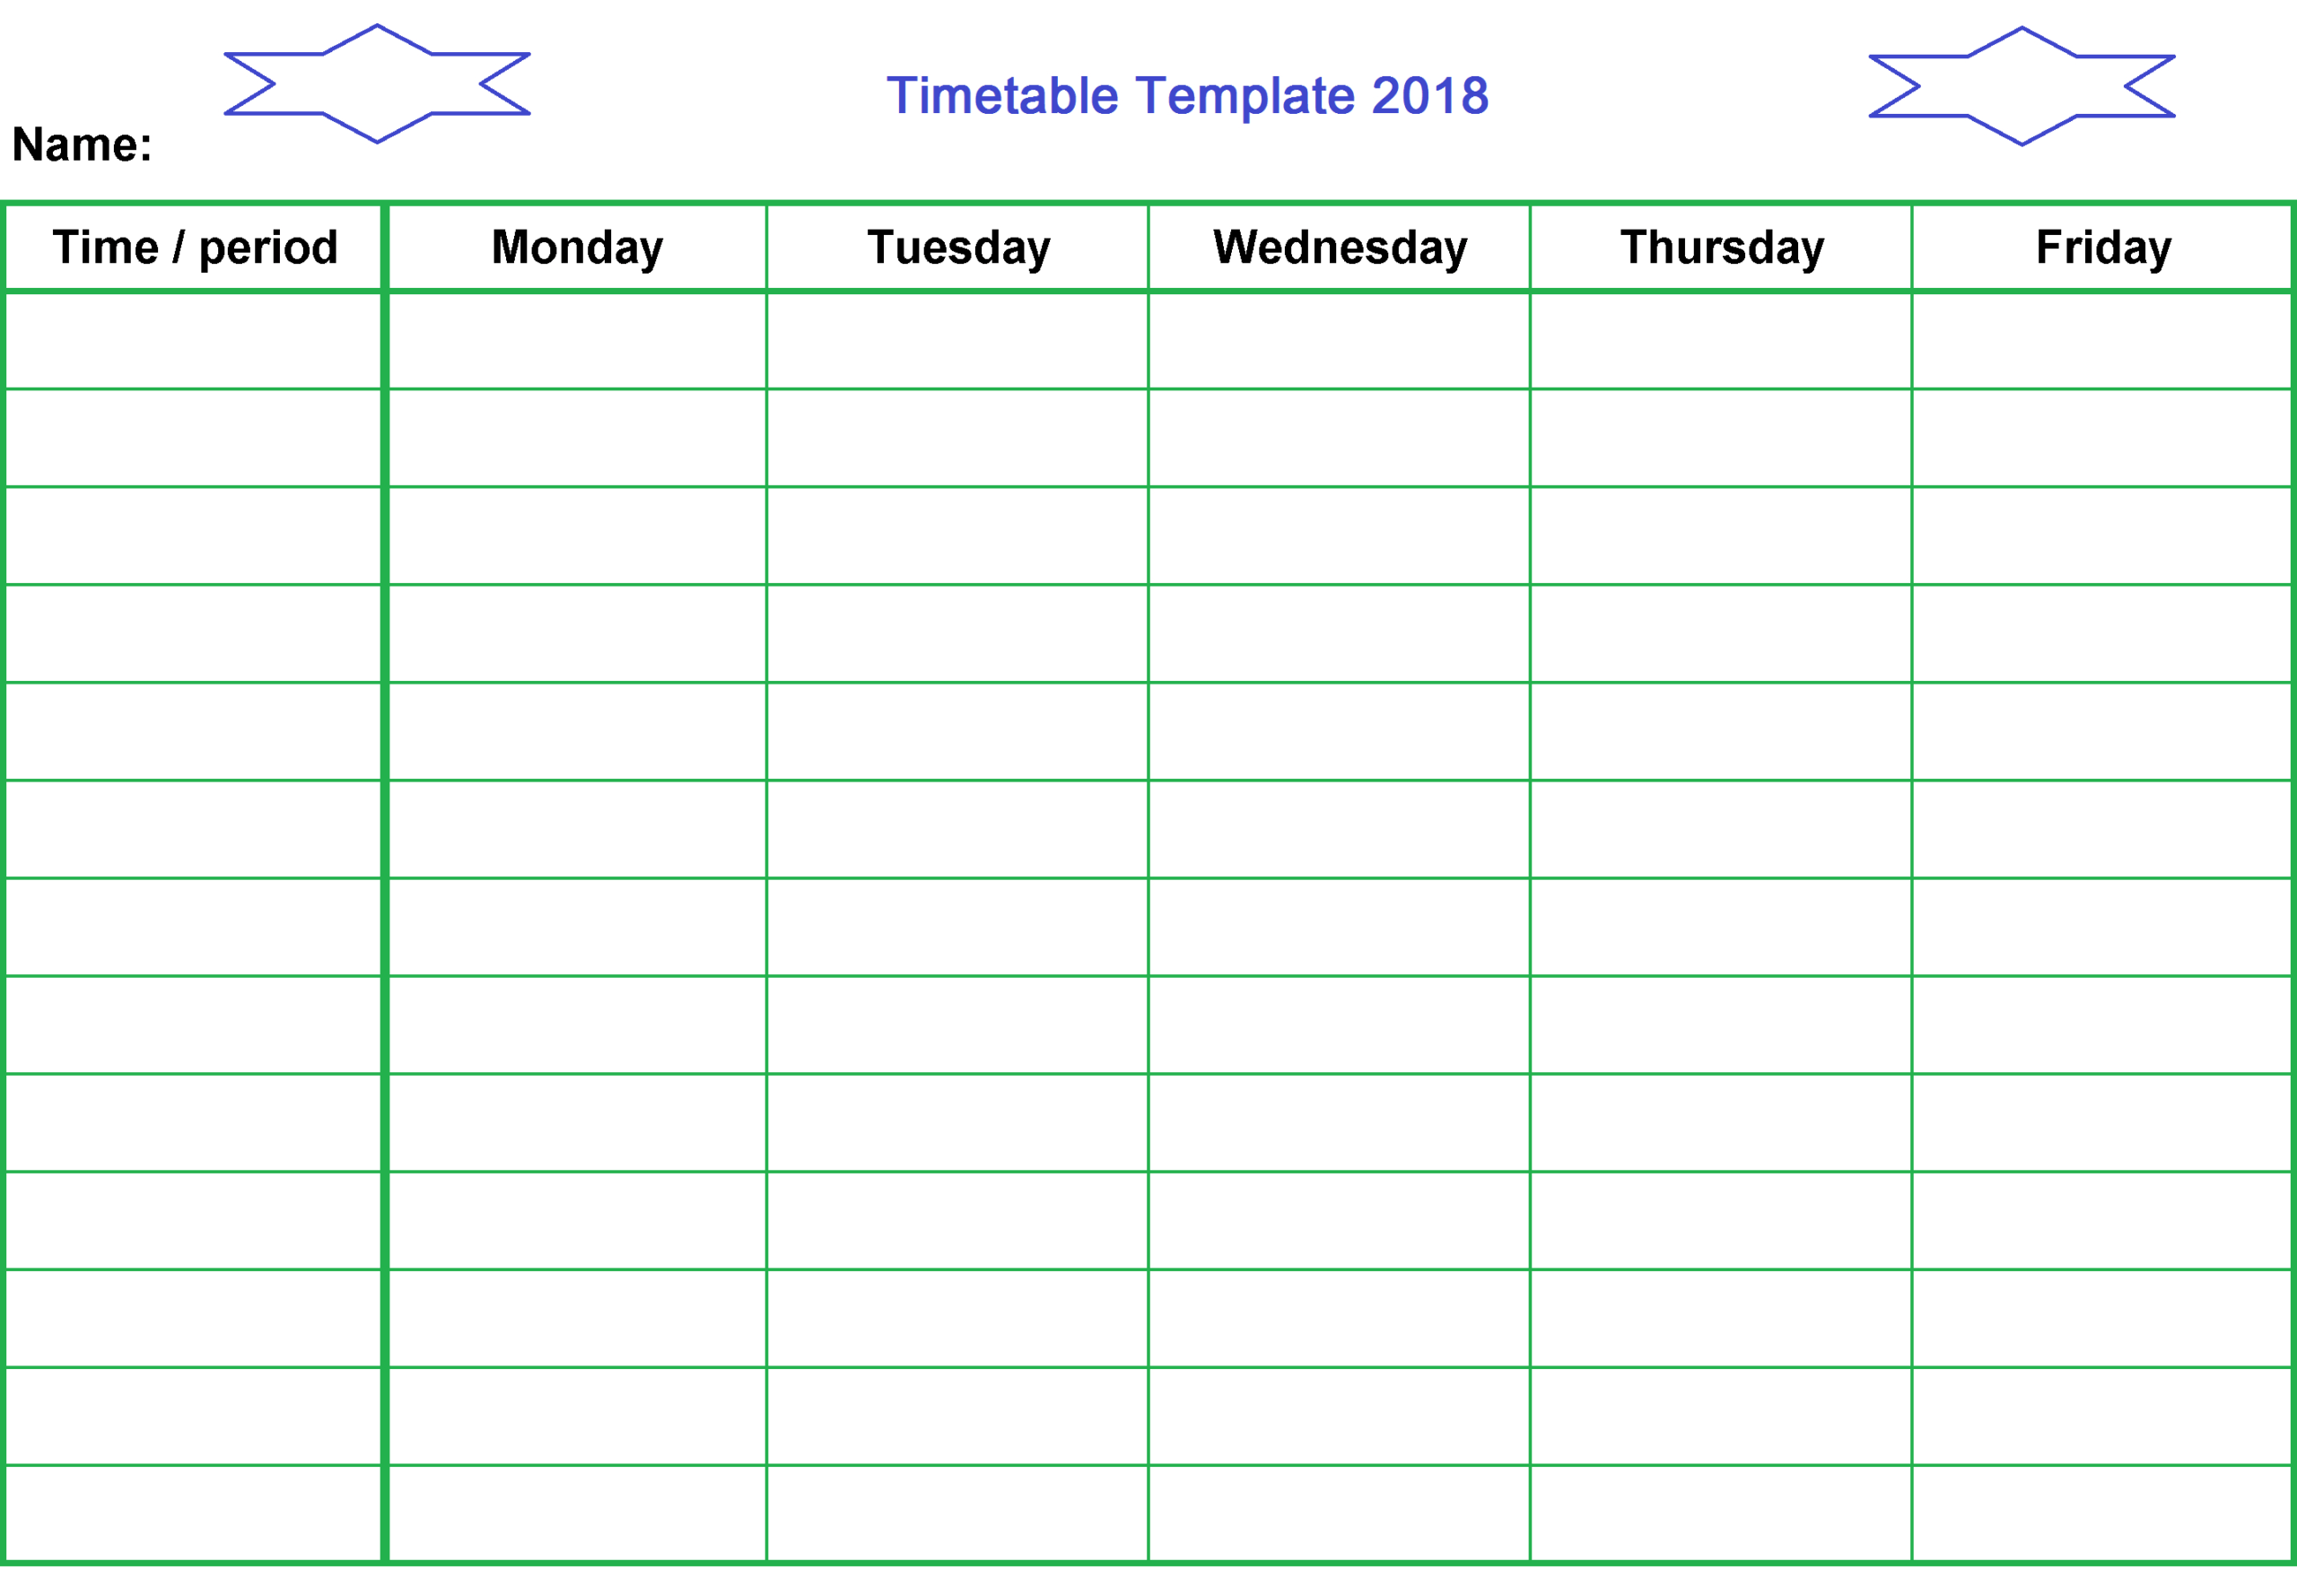 Timetable Template 2018 #schooltimetabletemplateword In Blank Revision Timetable Template